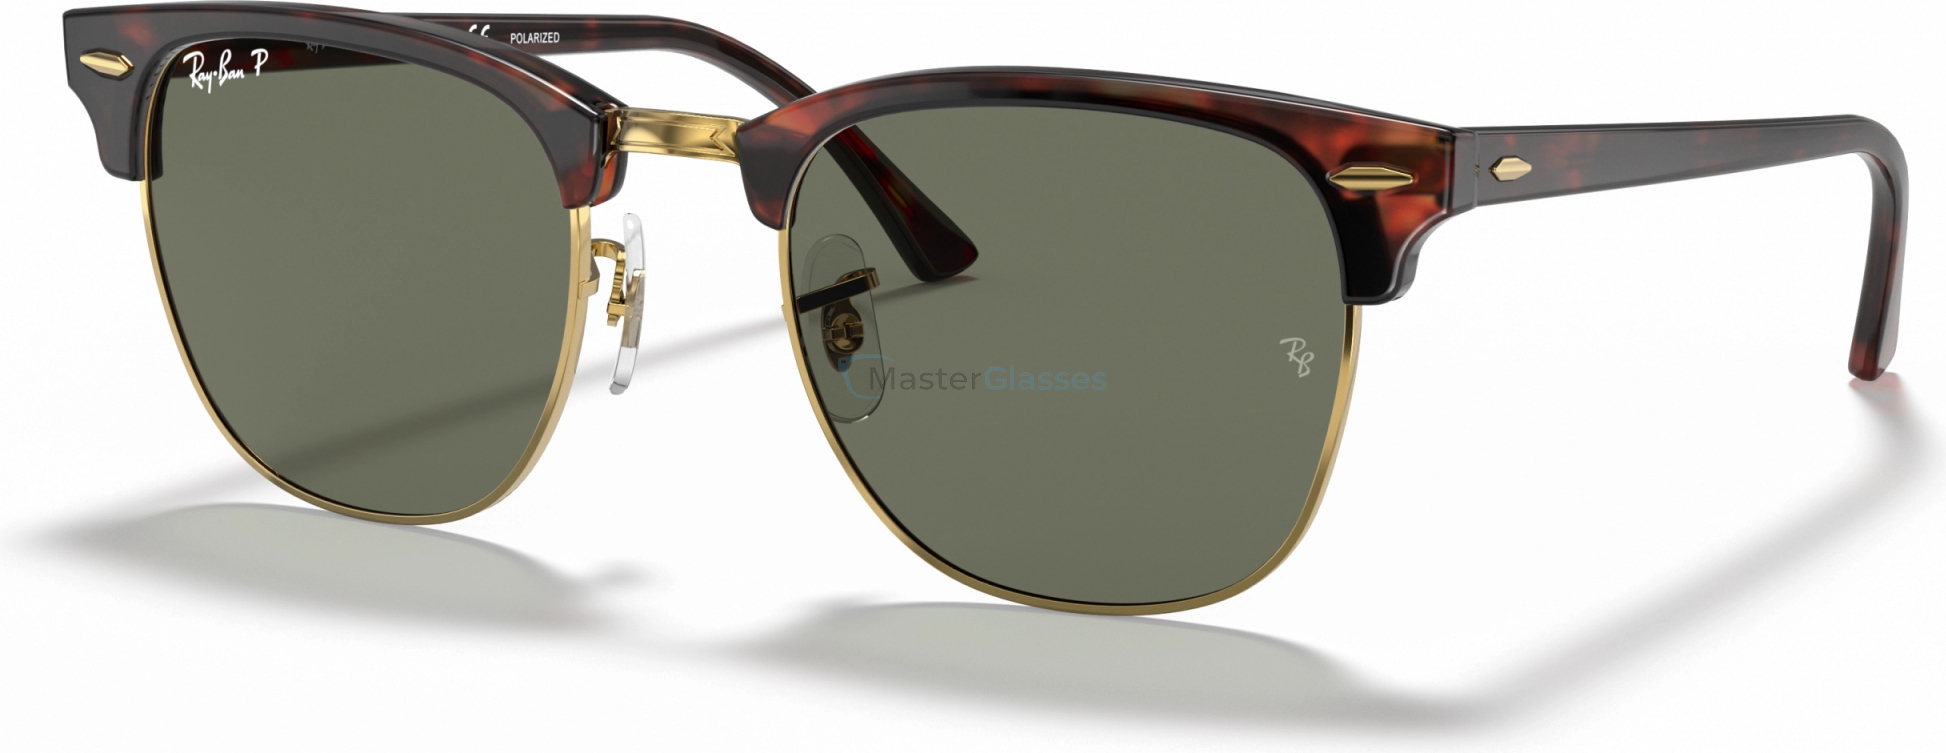 Ray-Ban Clubmaster RB3016 990/58 Polarized